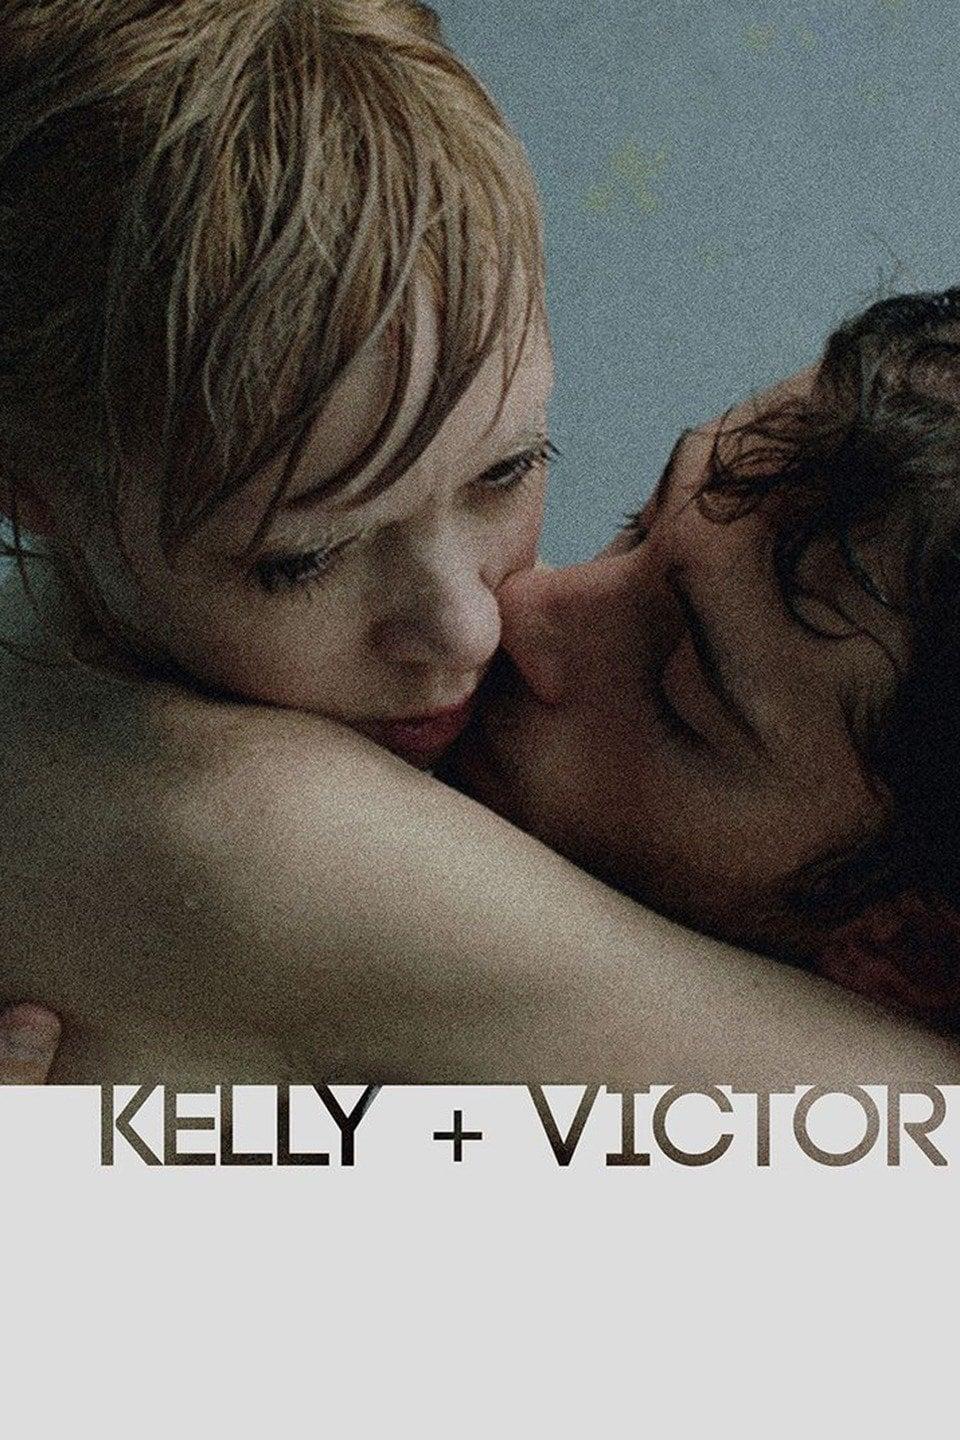 Kelly + Victor poster